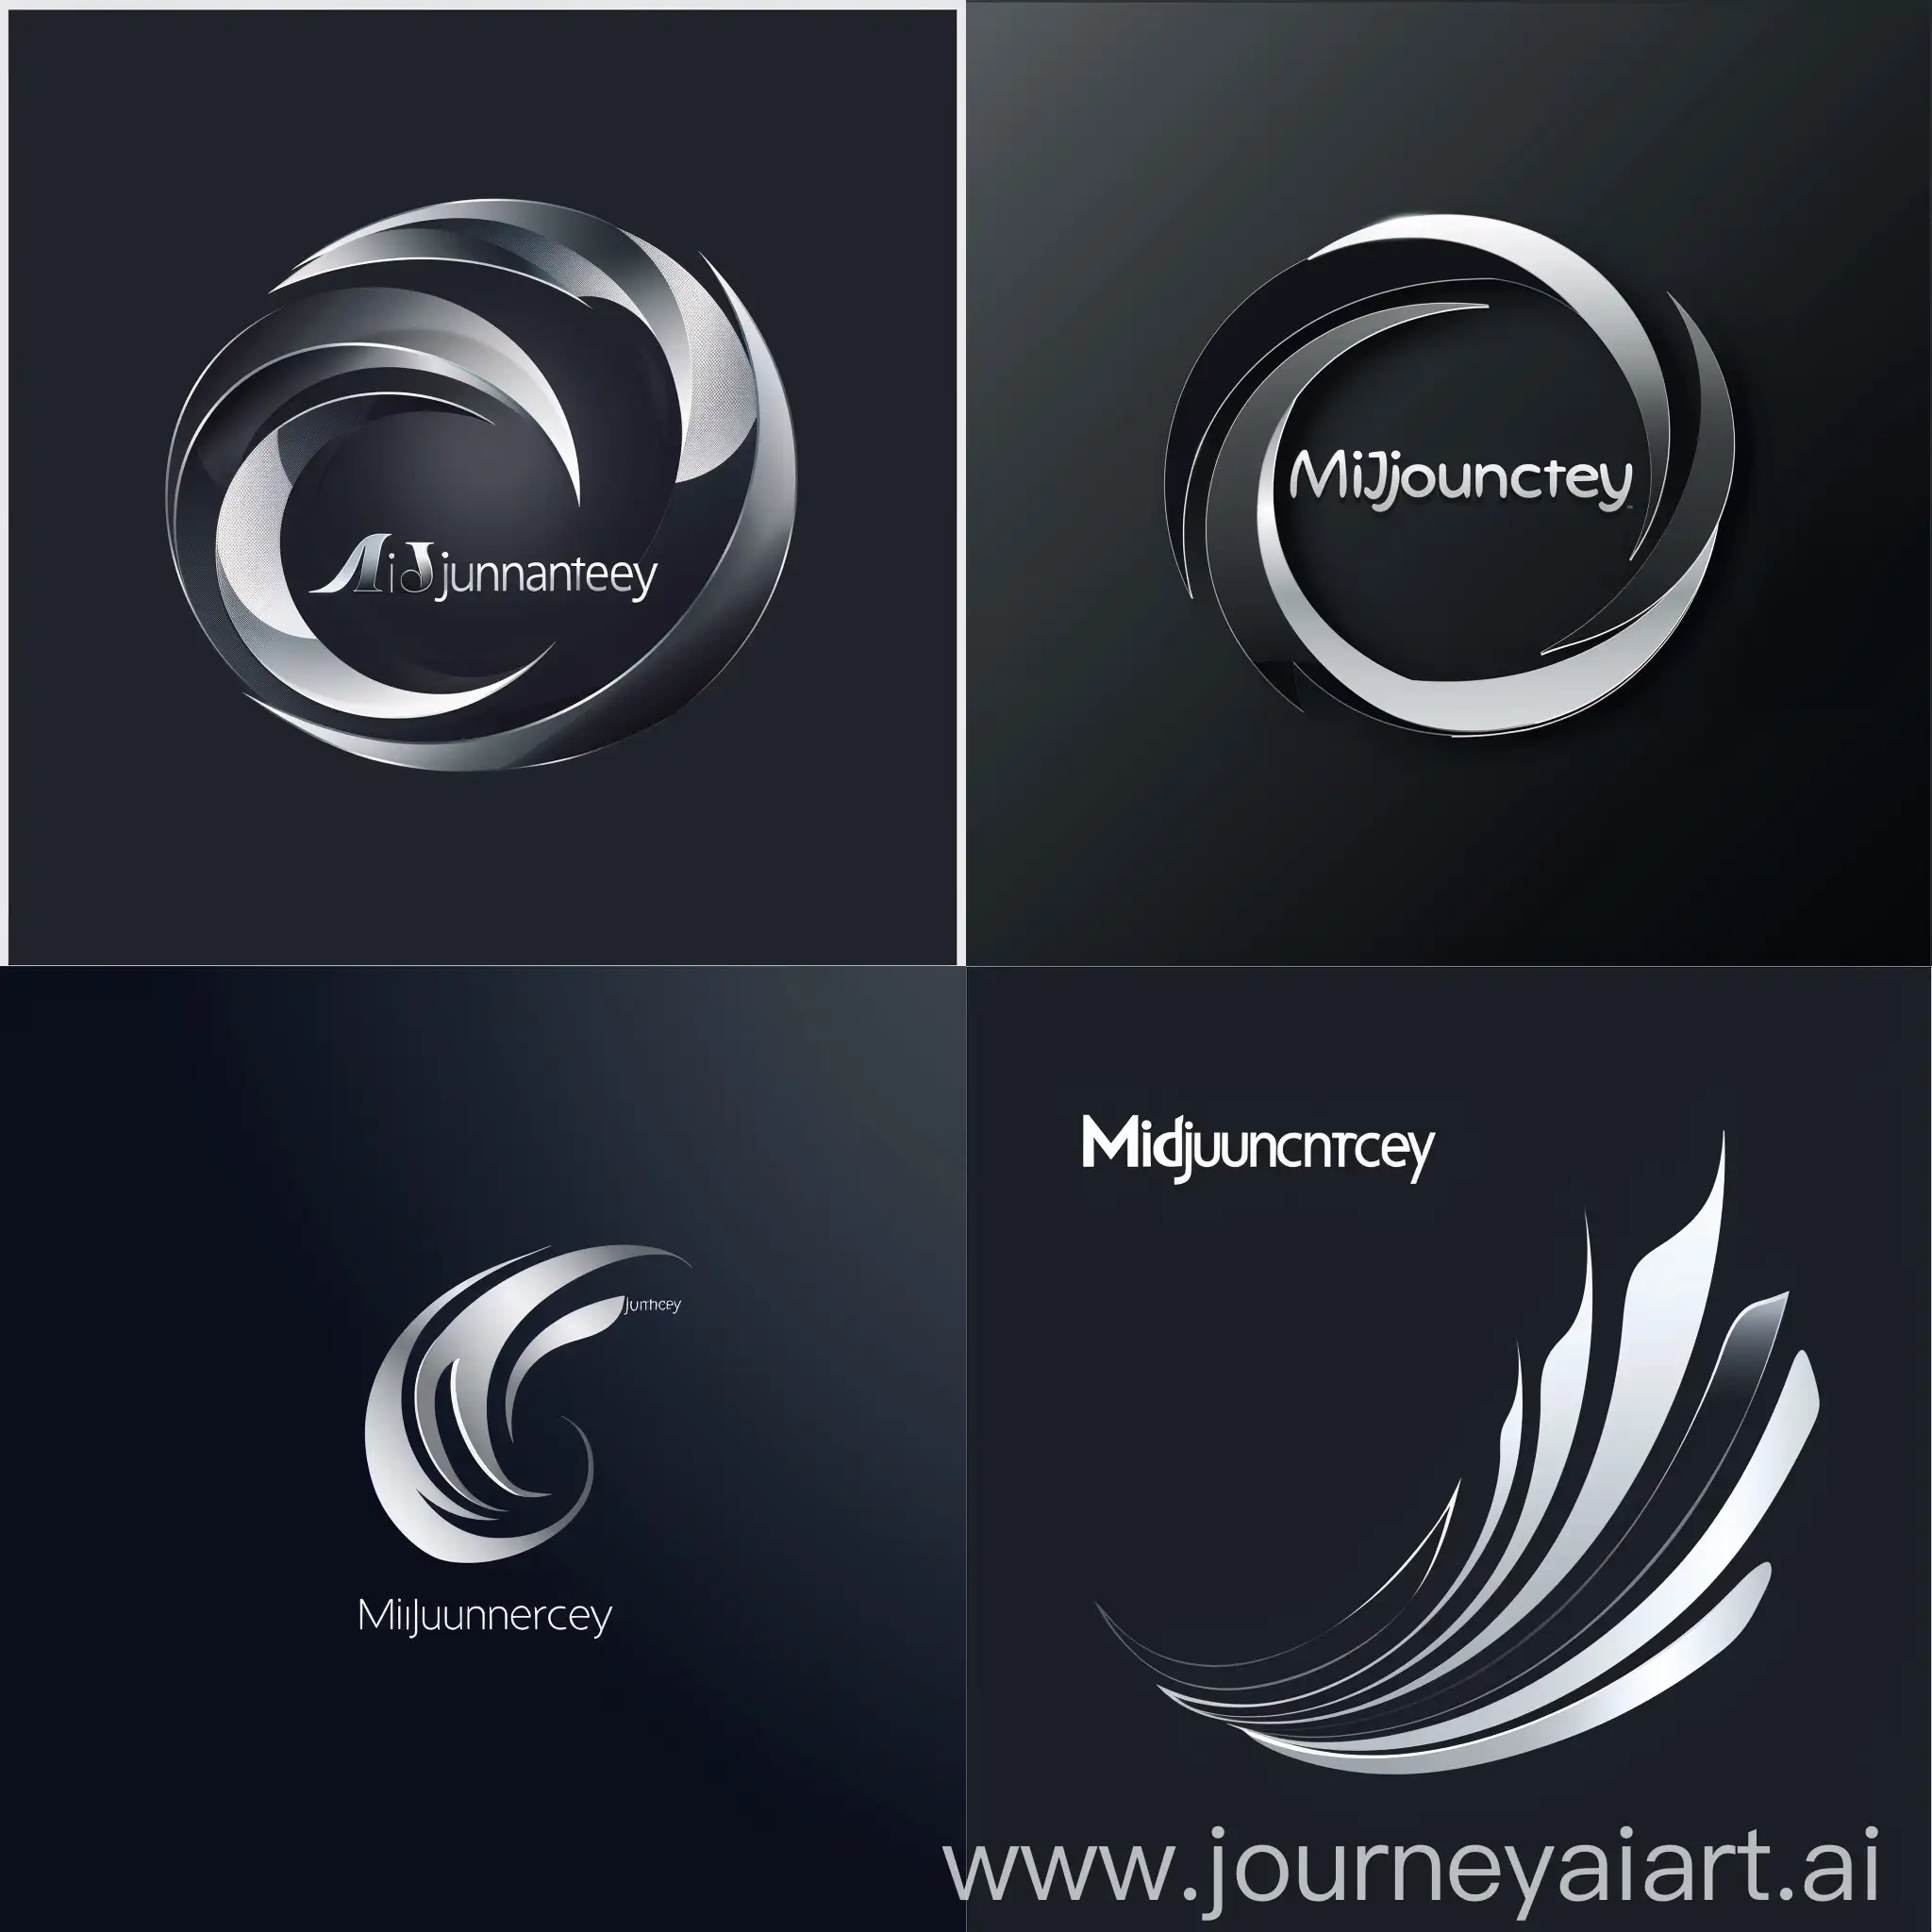 A sleek abstract MidJourney logo for a fintech company, featuring dynamic curves and a metallic silver finish.